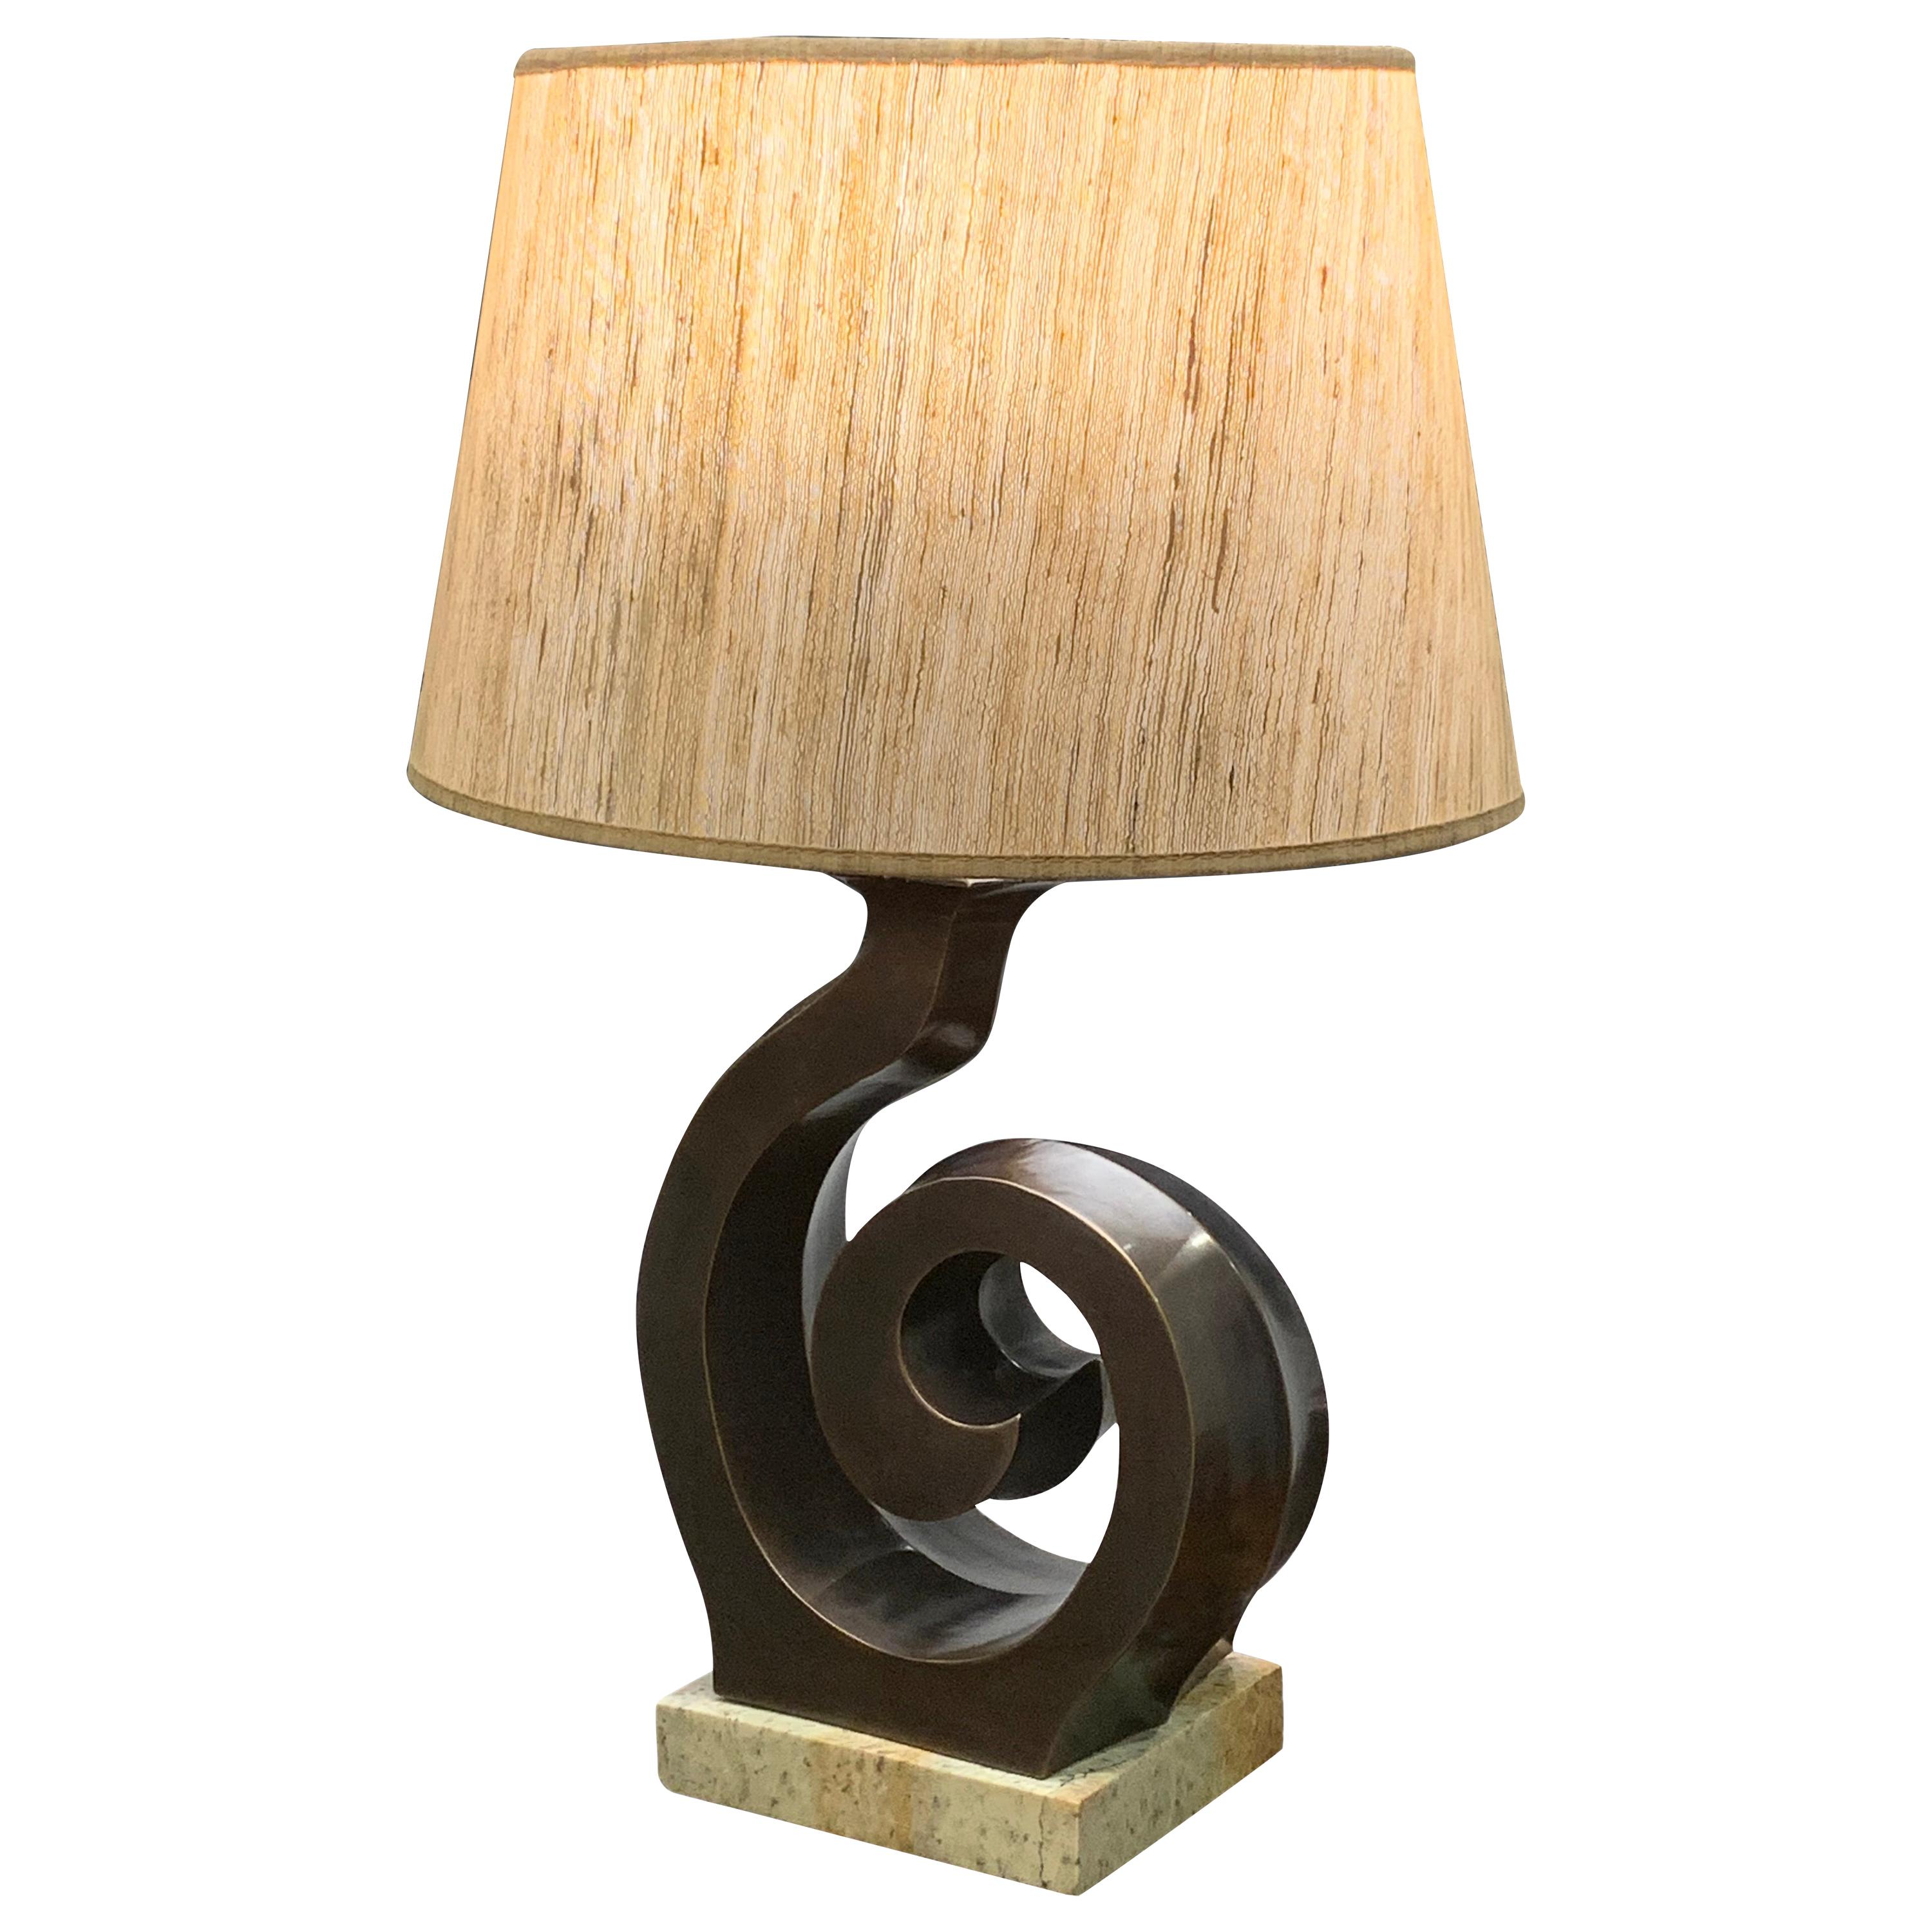 Spiral Bronze Lamp, No Screen or Shade Included